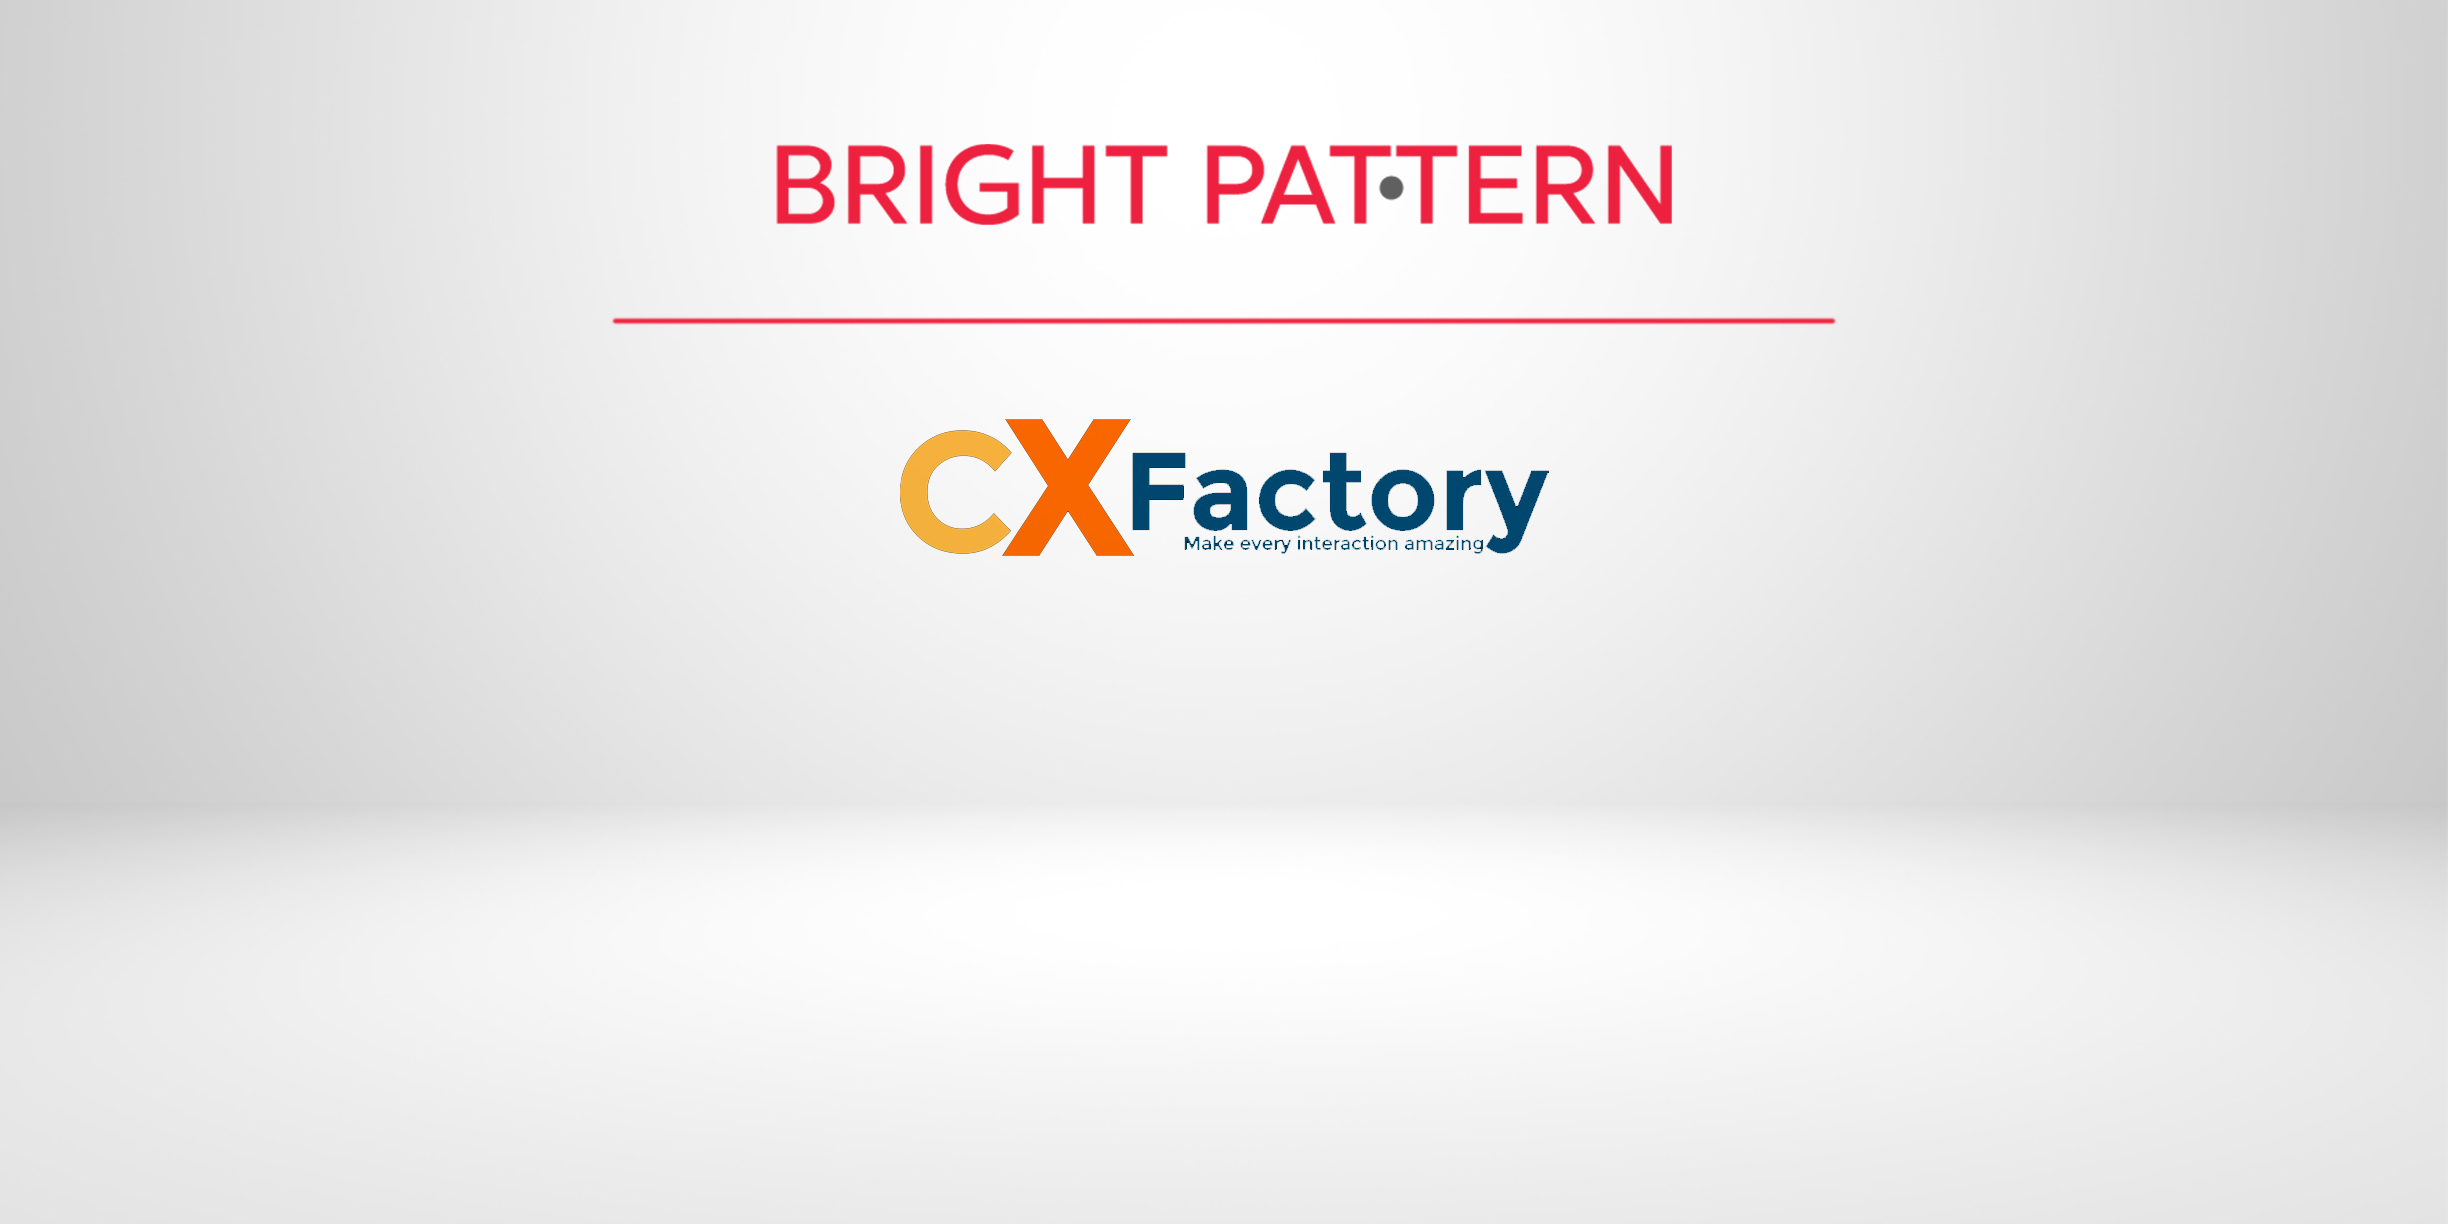 Bright Pattern and CX Factory